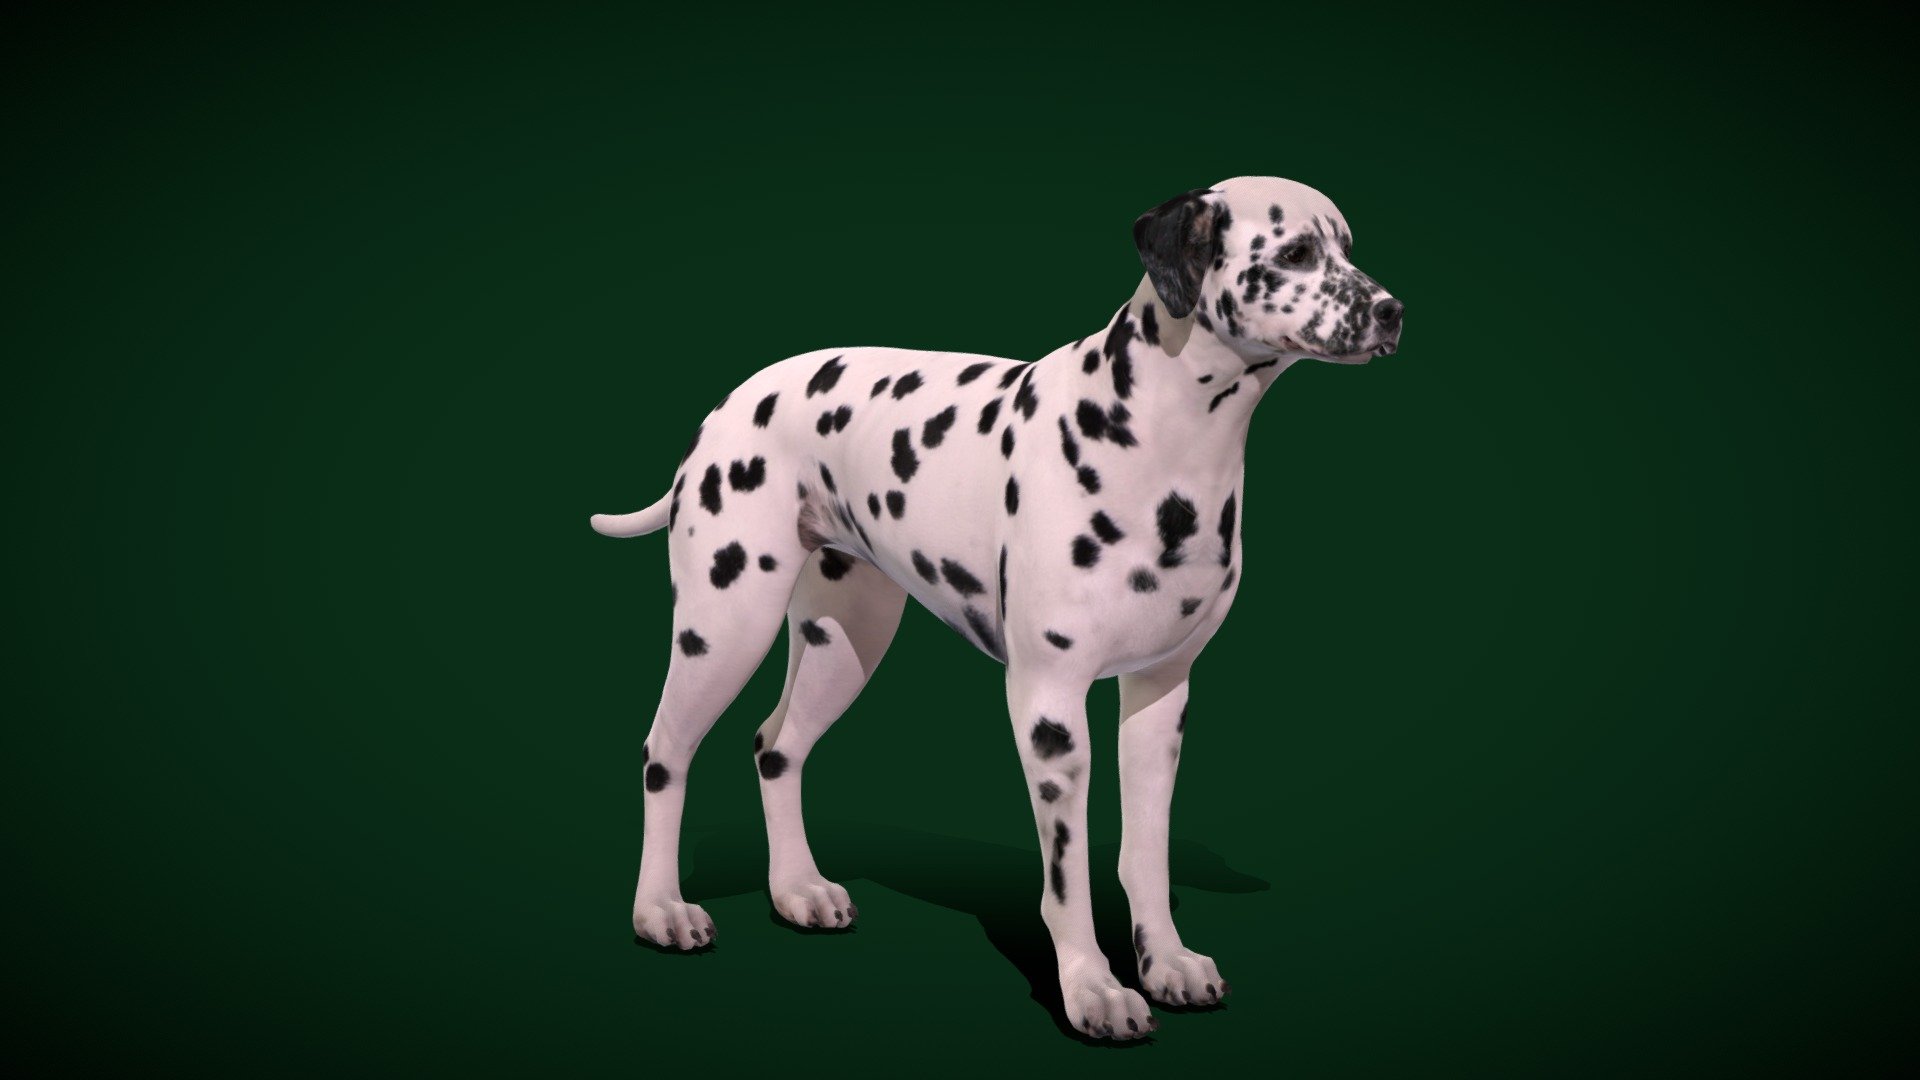 Dalmatian Dog  Breed (Dalmatia)Croatia's Dalmatia region

Canis lupus familiaris Animal Mammal(hunting dog) muscular,Pet,cute

1 Draw Calls

MidPoly 

Game Ready (Character)

Subdivision Surface Ready

11- Animations (Root/In_Place)UnrealBone

4K PBR Textures Material

Unreal/Unity FBX 

Blend File 3.6.5 LTS / 4

USDZ File (AR Ready). Real Scale Dimension (Xcode ,Reality Composer, Keynote Ready)

Textures Files

GLB File (Unreal 5.1 Plus Native Support)

Gltf File ( Spark AR, Lens Studio(SnapChat) , Effector(Tiktok) , Spline, Play Canvas,Omiverse ) Compatible

Triangles -53423

Faces -27362

Edges -54583

Vertices -27305

Diffuse, Metallic, Roughness , Normal Map ,Specular Map,AO

The Dalmatian is a breed of dog with a white coat marked with dark-coloured spots.Originally bred as a hunting dog, it was also used as a carriage dog in its early days. The origins of this breed can be traced back to present-day Croatia and its historical region of Dalmatia
 - Dalmatian Dog Breed (Game Ready) - Buy Royalty Free 3D model by Nyilonelycompany 3d model